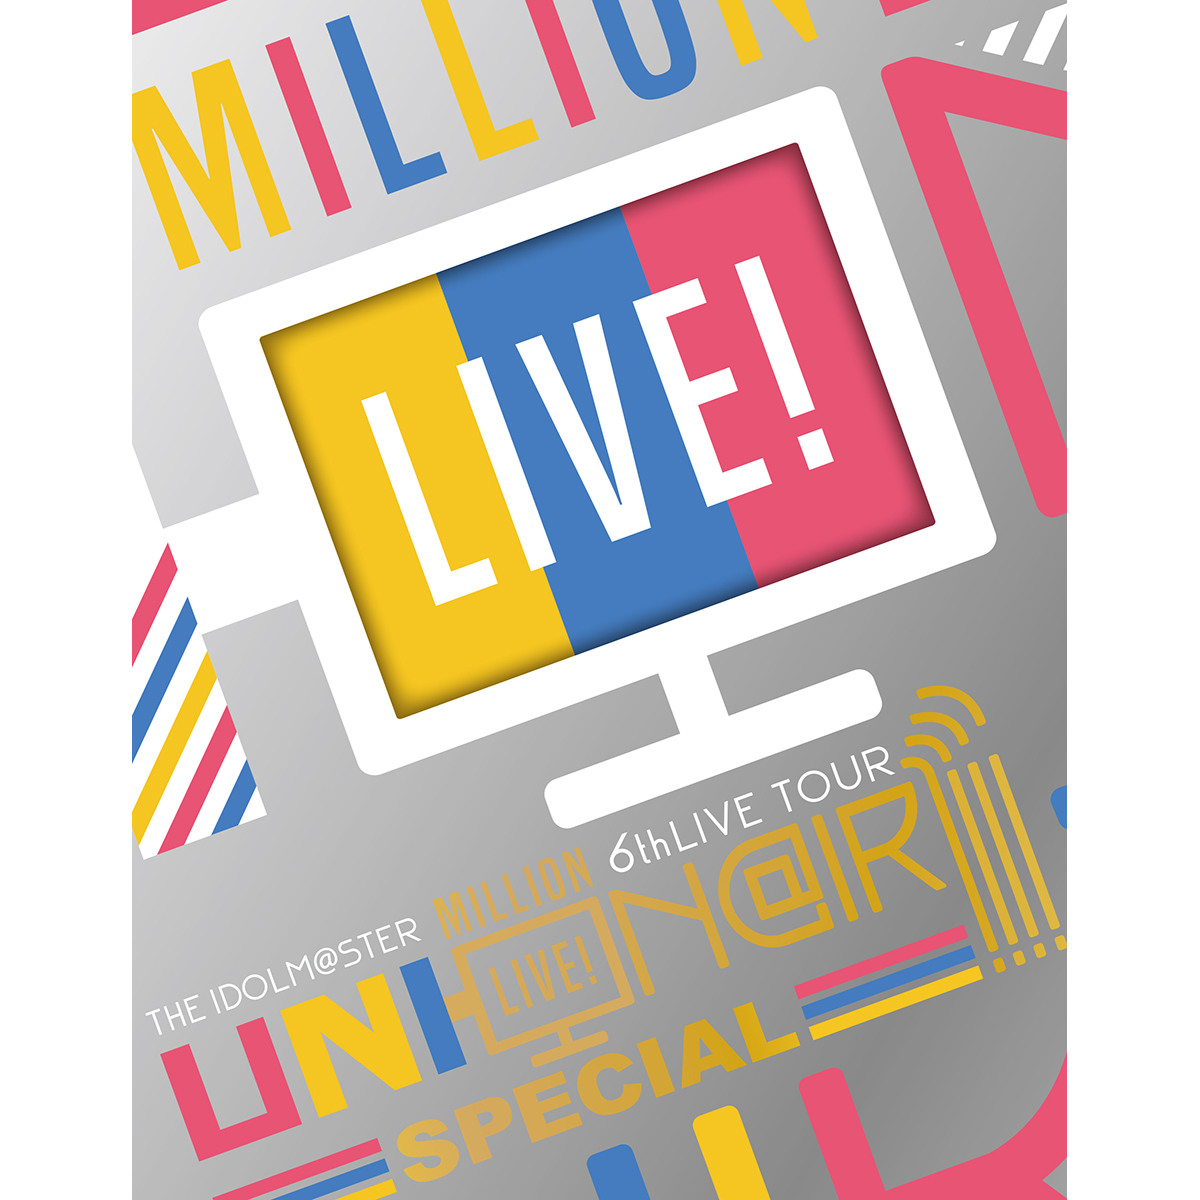 The Idolm Ster Million Live 6thlive Tour Uni On Ir Live Blu Ray Special Complete The Ter Limited Edition Mar 21 Delivery The Idolm Ster Premium Bandai Usa Online Store For Action Figures Model Kits Toys